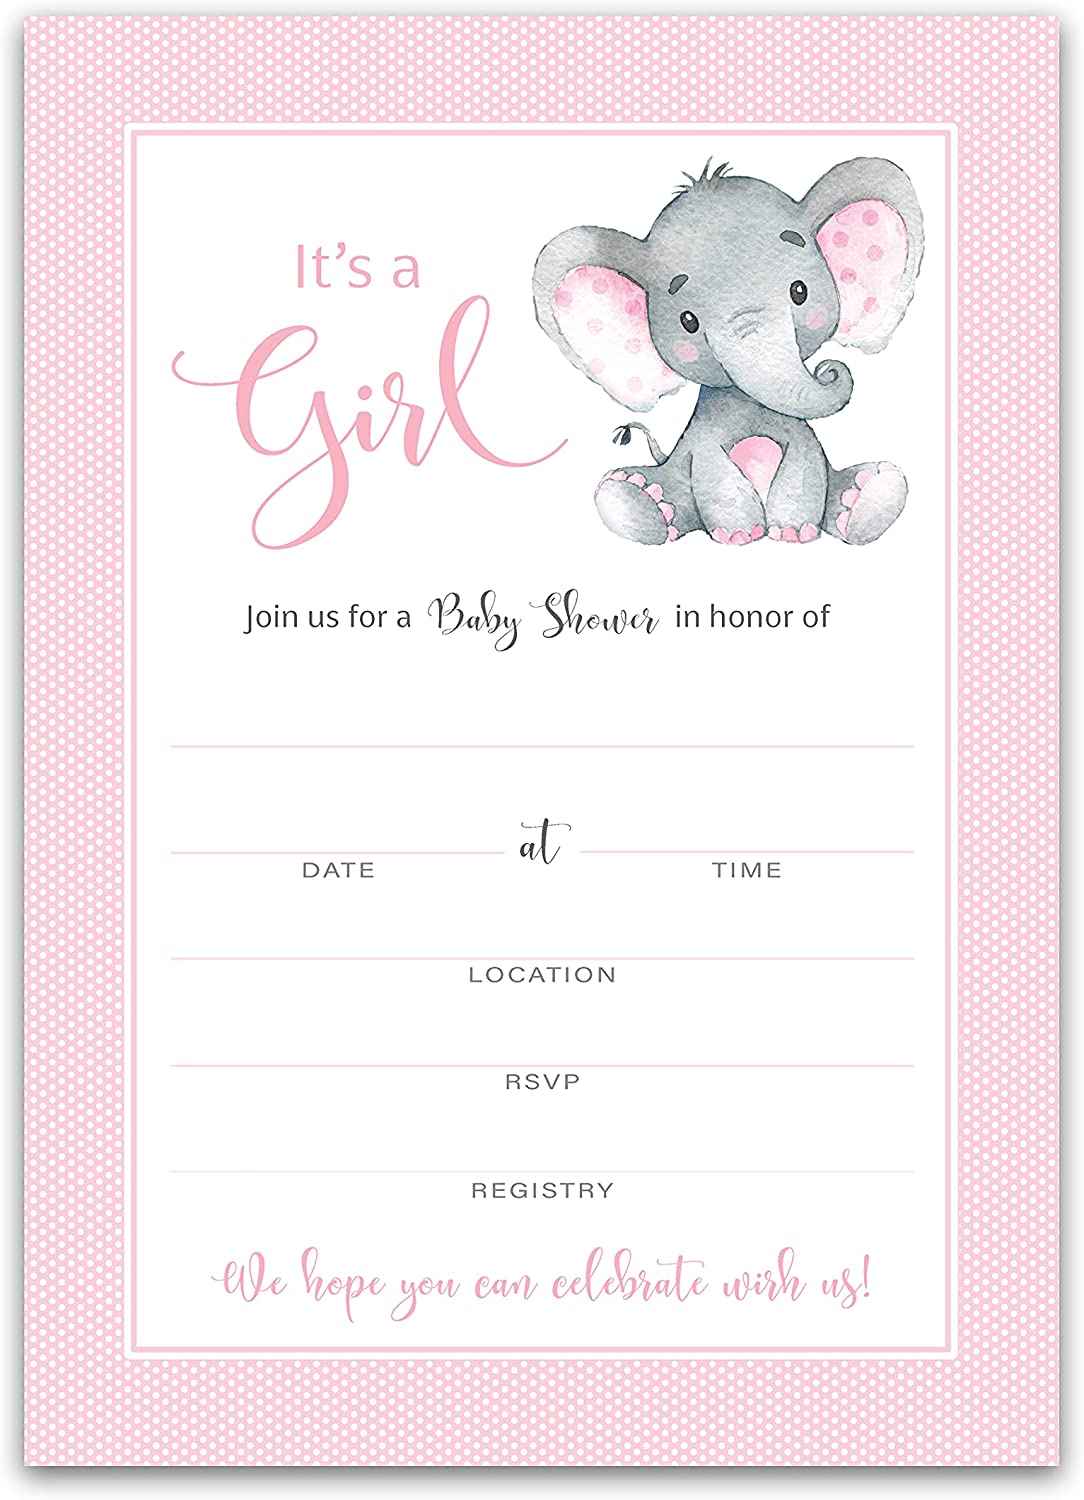 It's a Girl! • Pink Elephant Baby Shower Invitations • SET of 25